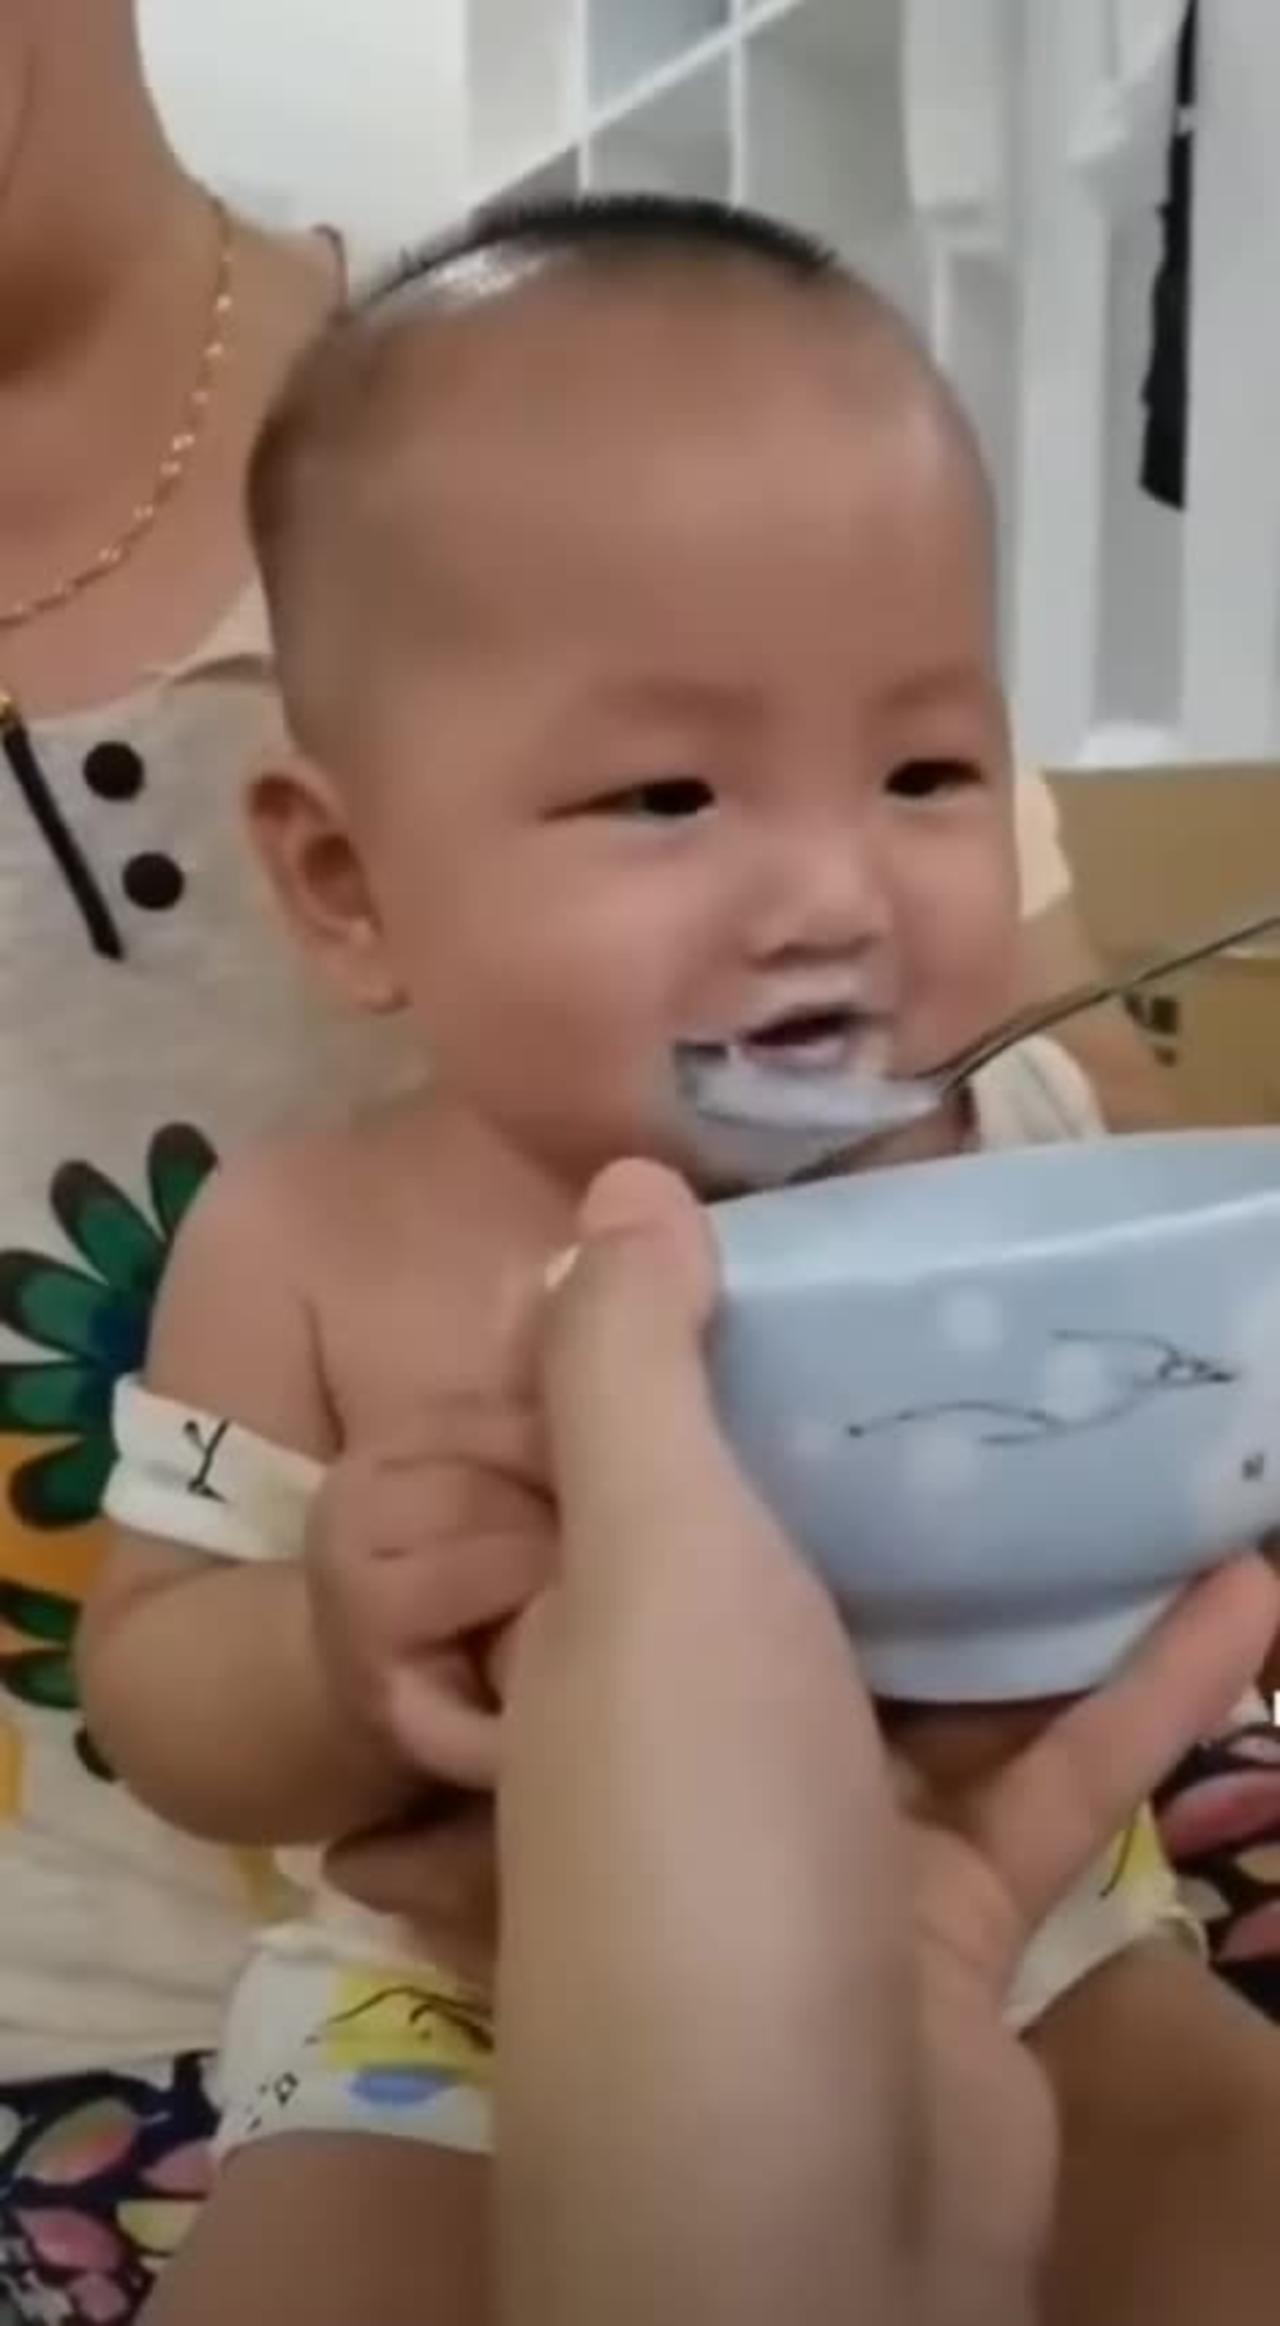 Cute baby laughing